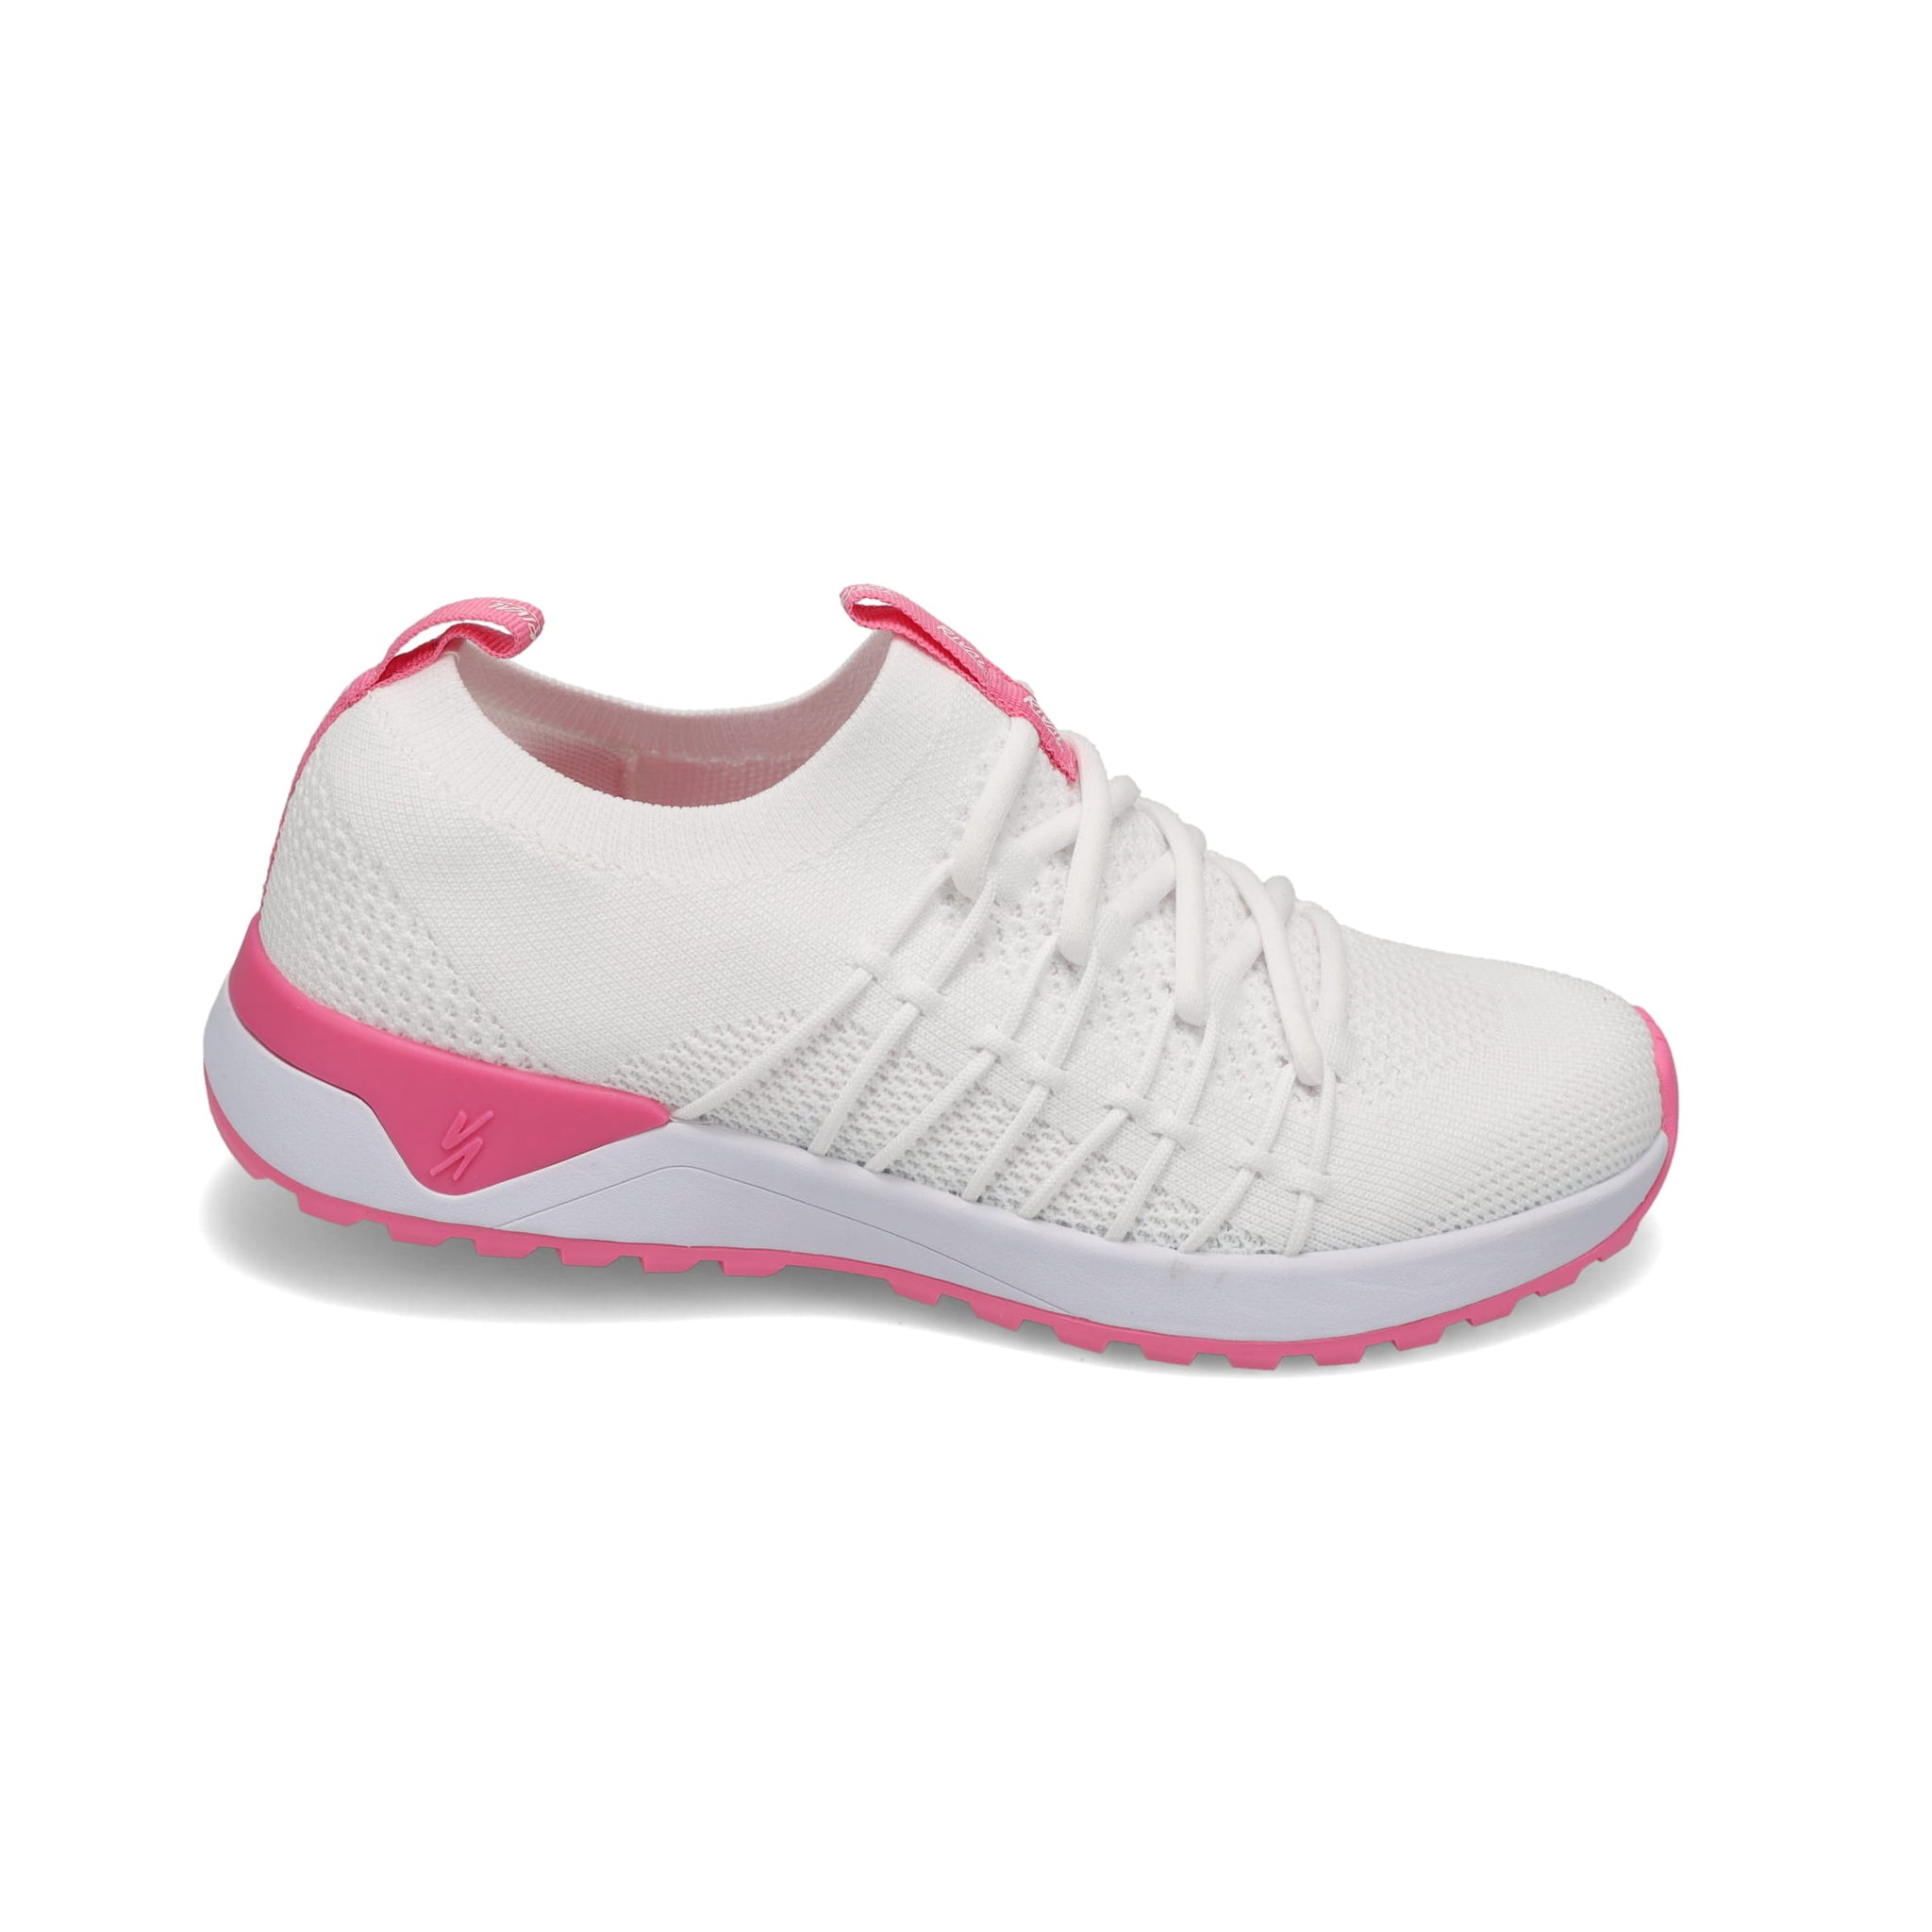 Women's Slip-On Shoes - White/Bright Pink/White Drive